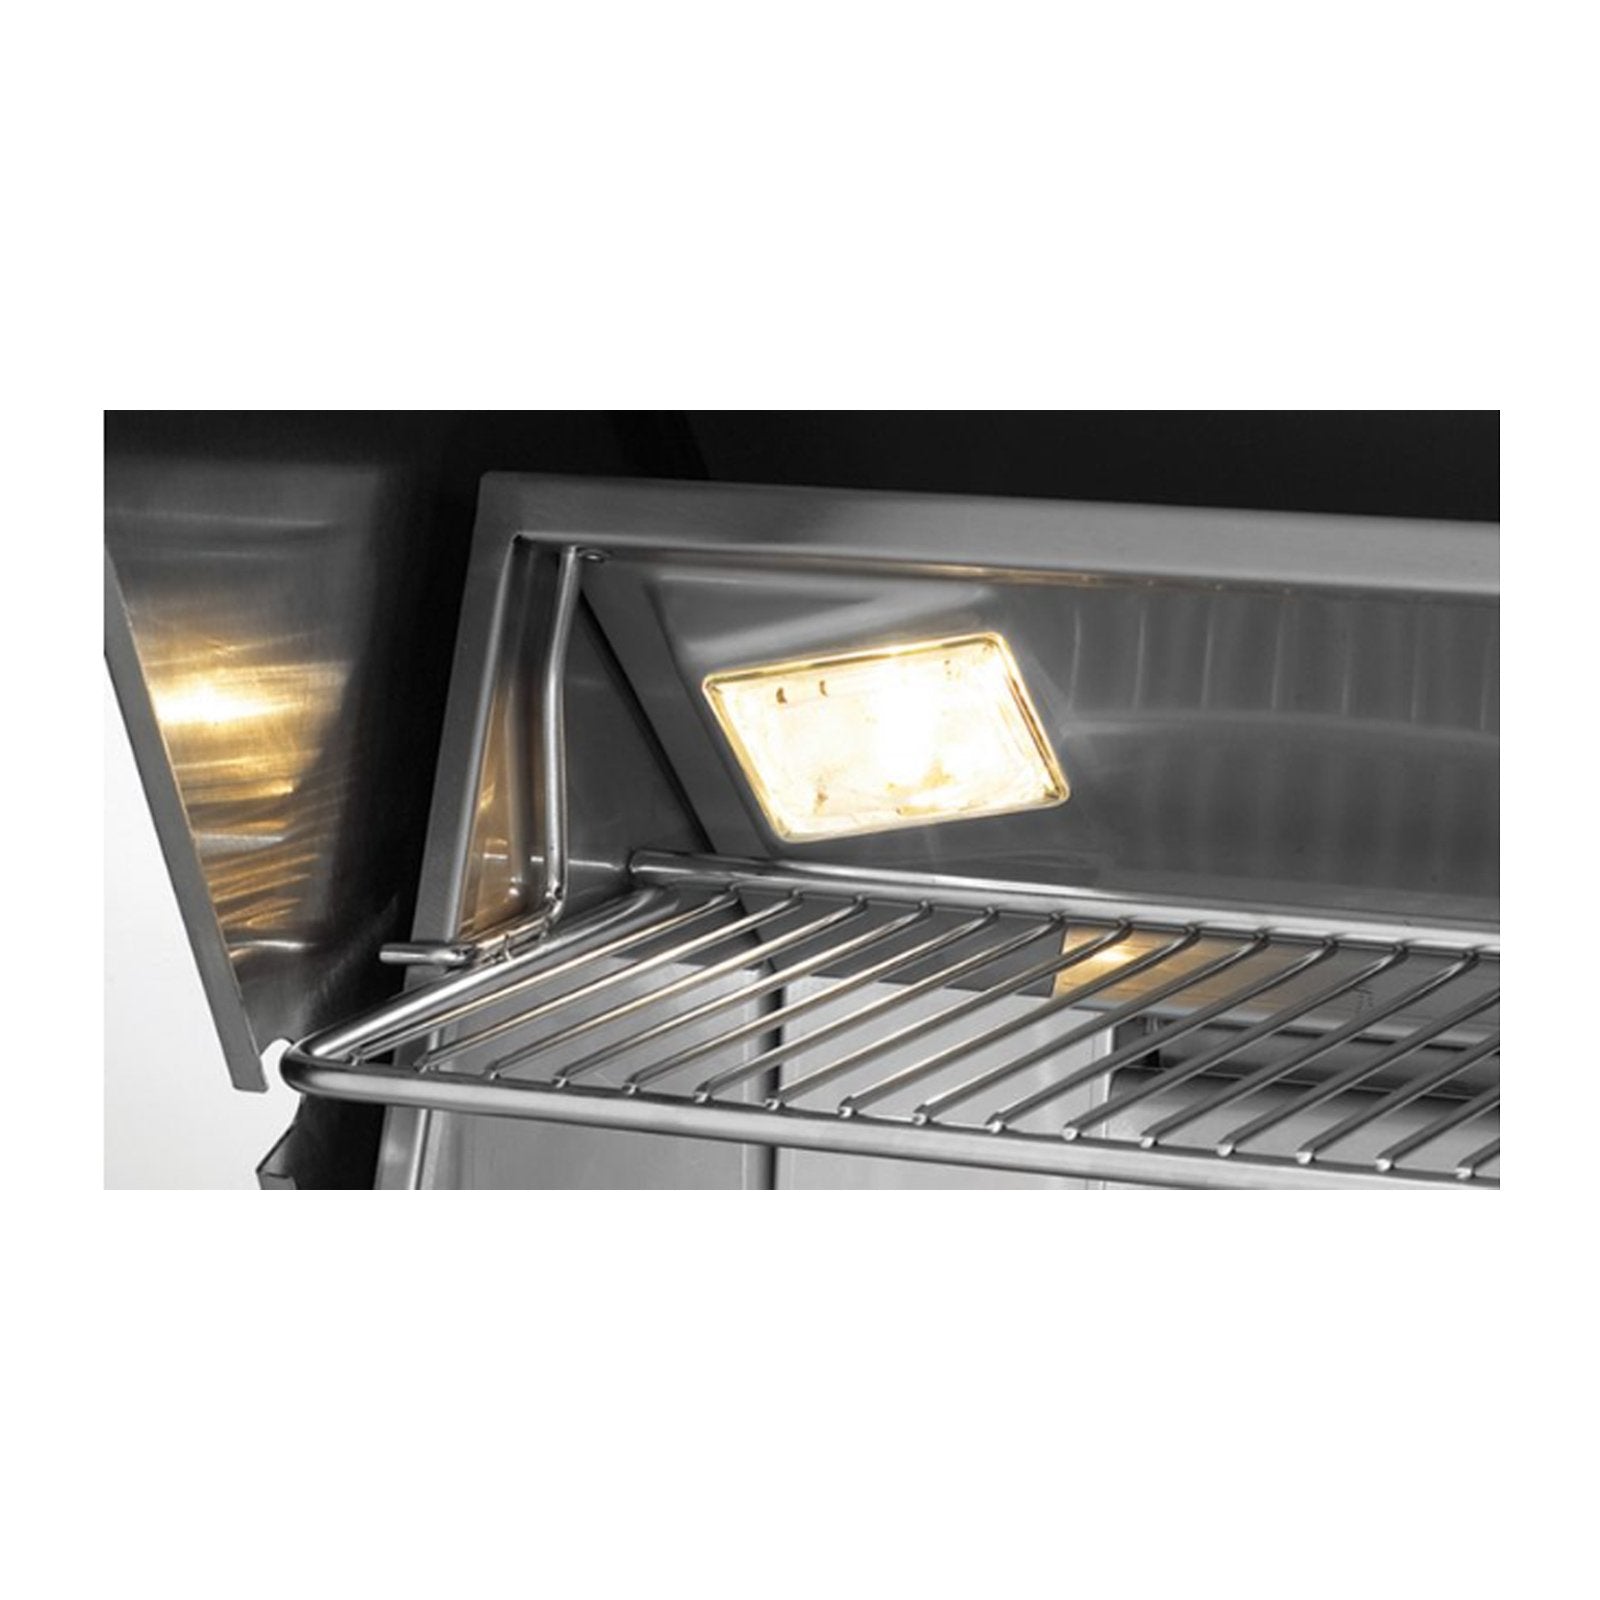 fire-magic-a790i-36-built-in-gas-grill-w-rotisserie-analog-thermometer 5